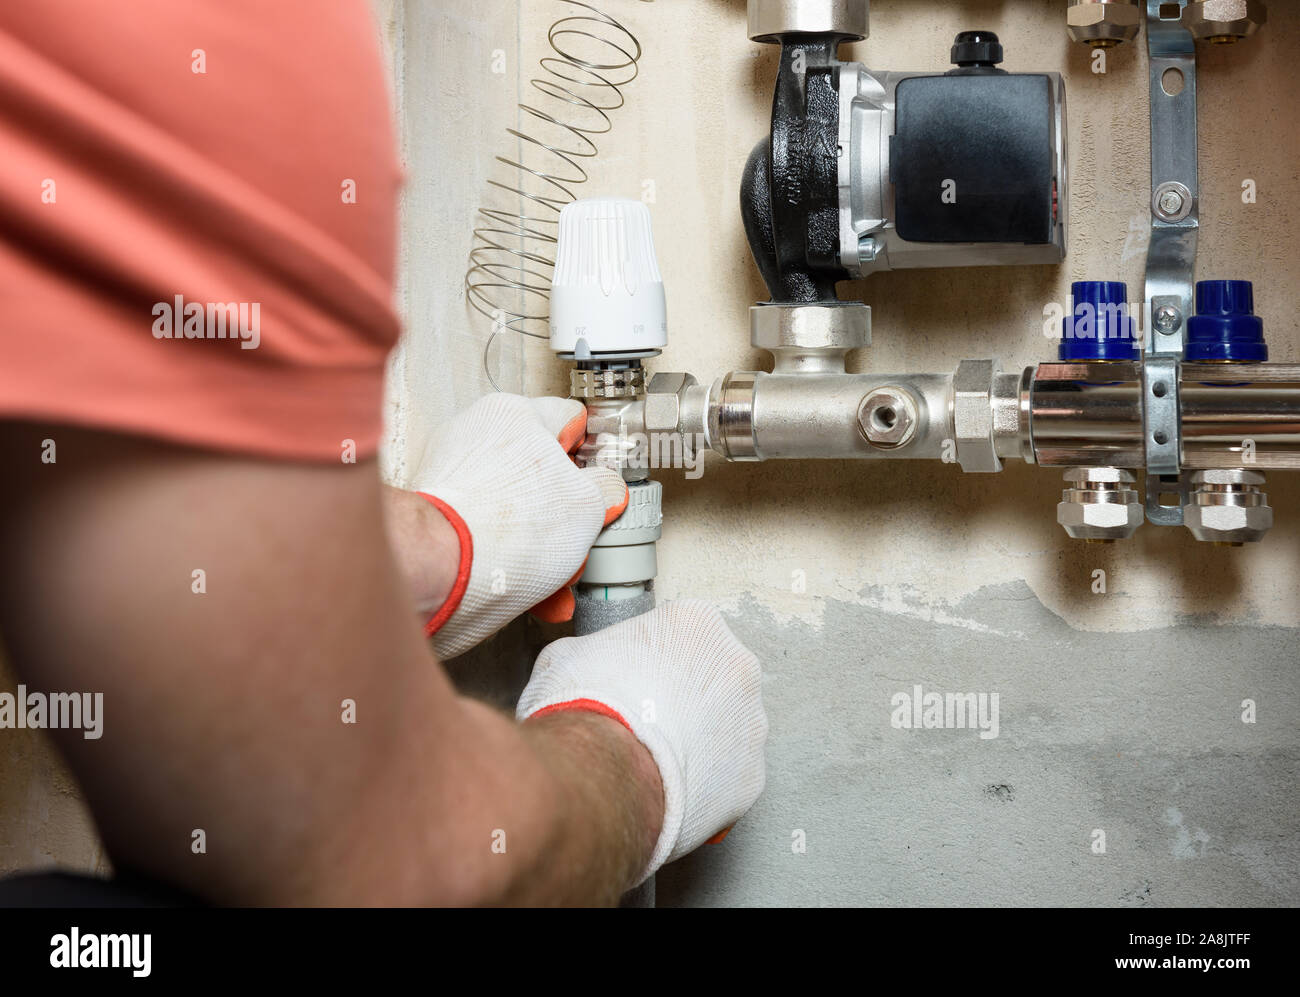 A worker is installing a thermal head on the home heating system distributor. Stock Photo